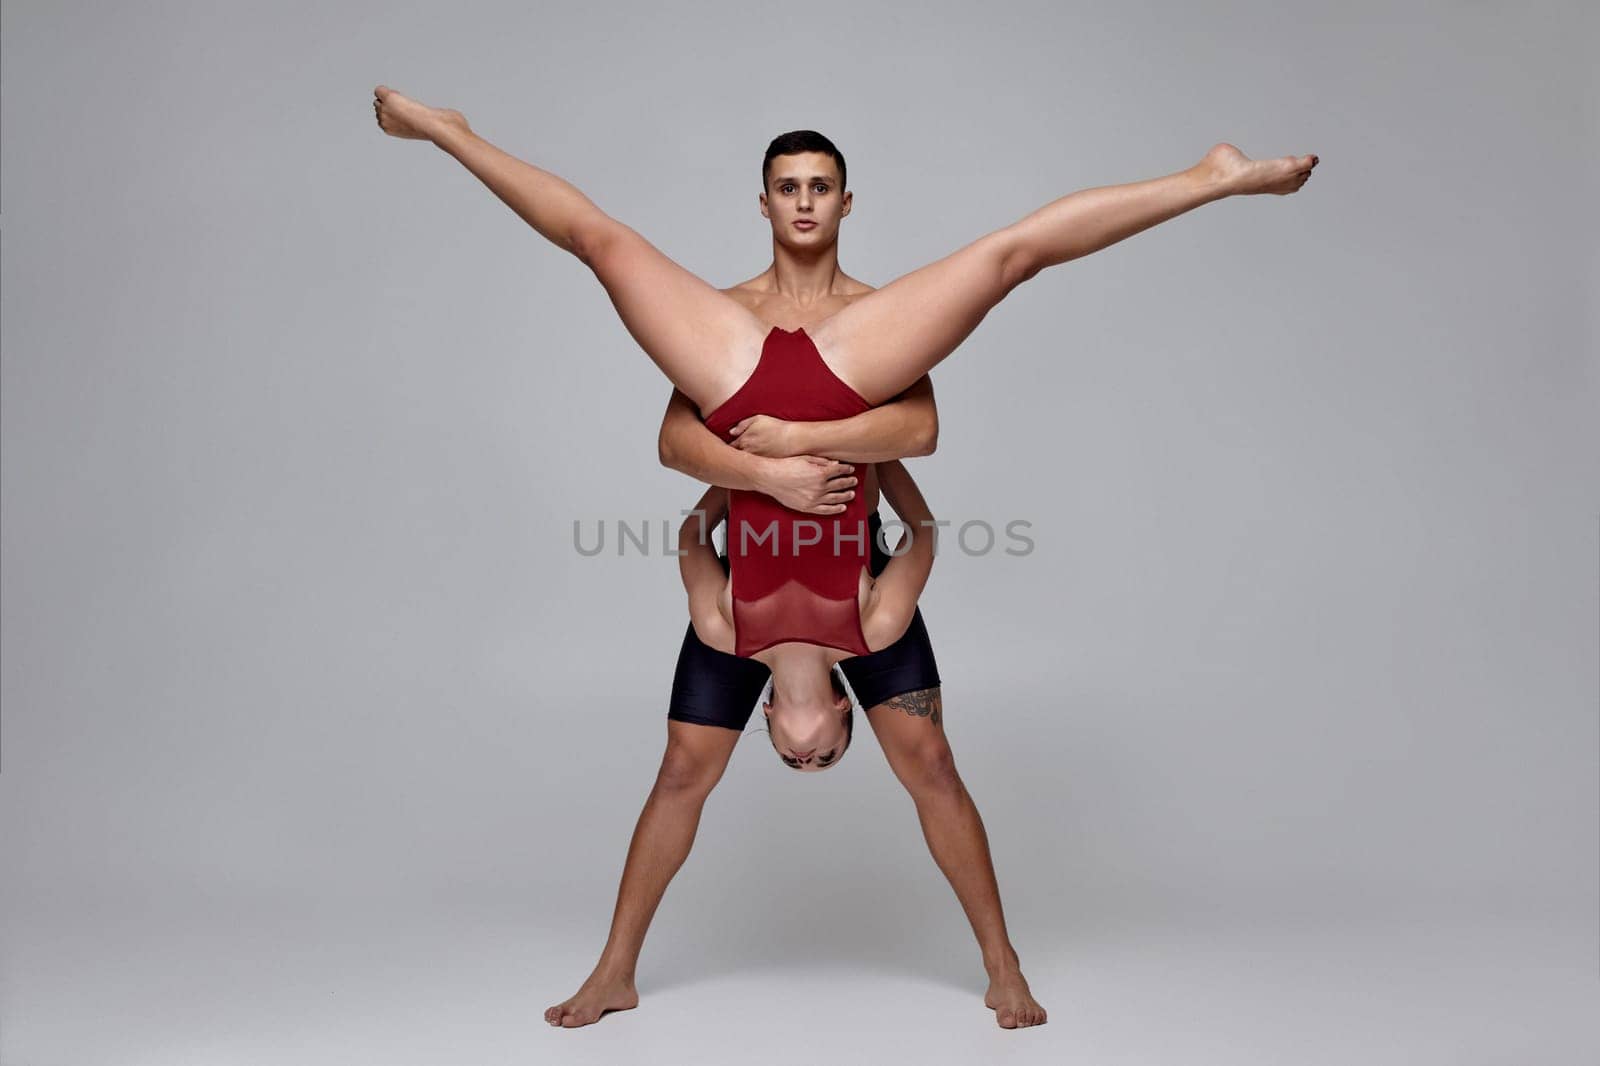 The couple of a young modern ballet dancers are posing over a gray studio background. Man in black shorts and woman in a red swimwear are dancing together. Ballet and contemporary choreography concept. Art photo.